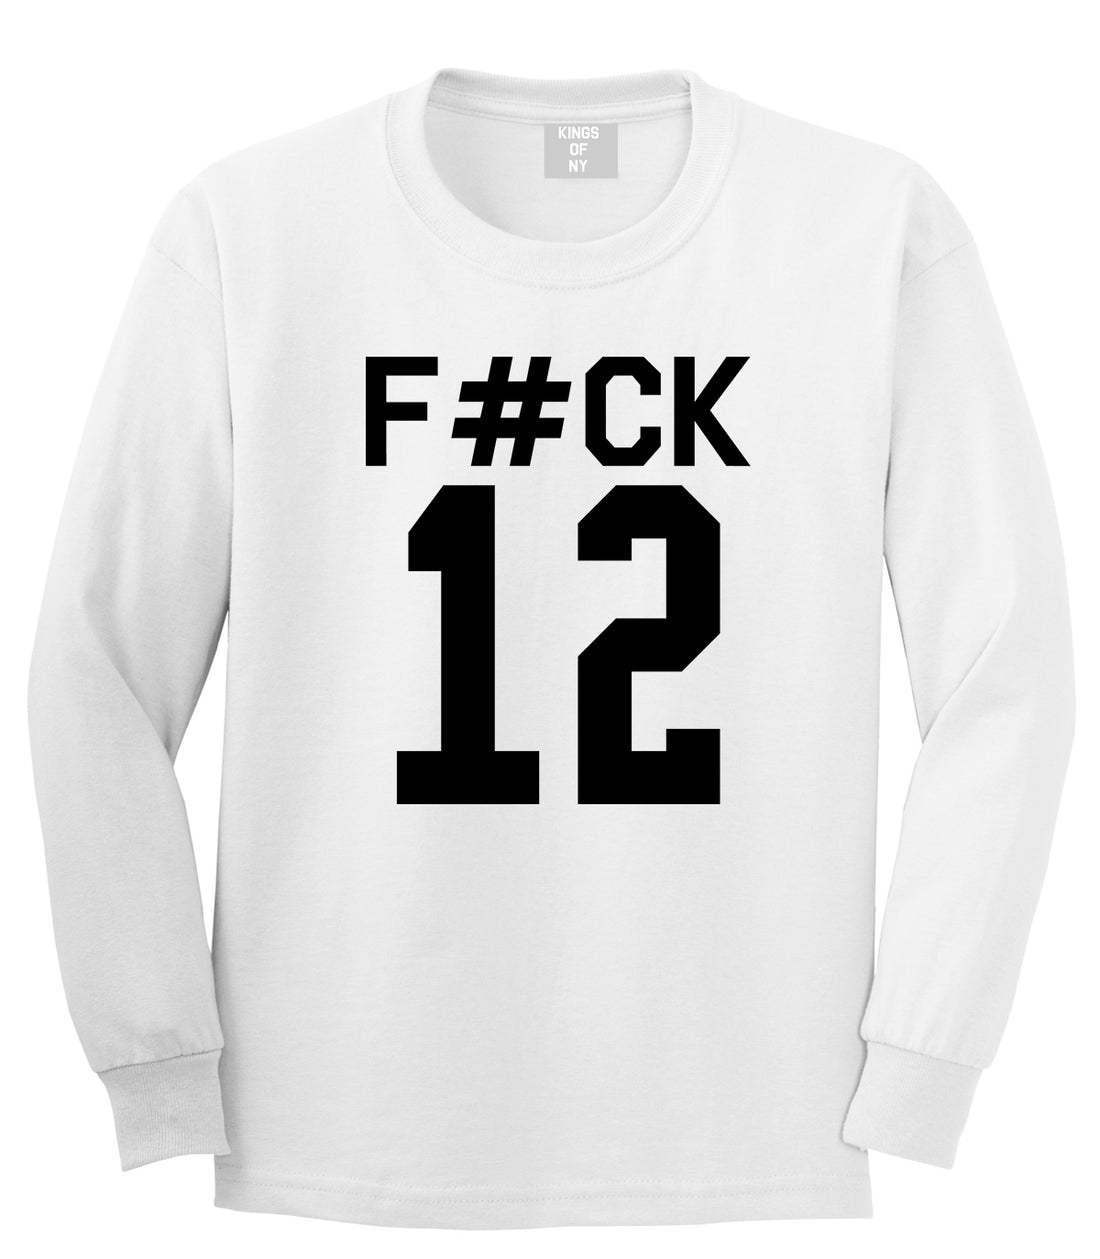 Fck 12 Police Brutality Mens Long Sleeve T-Shirt White by Kings Of NY